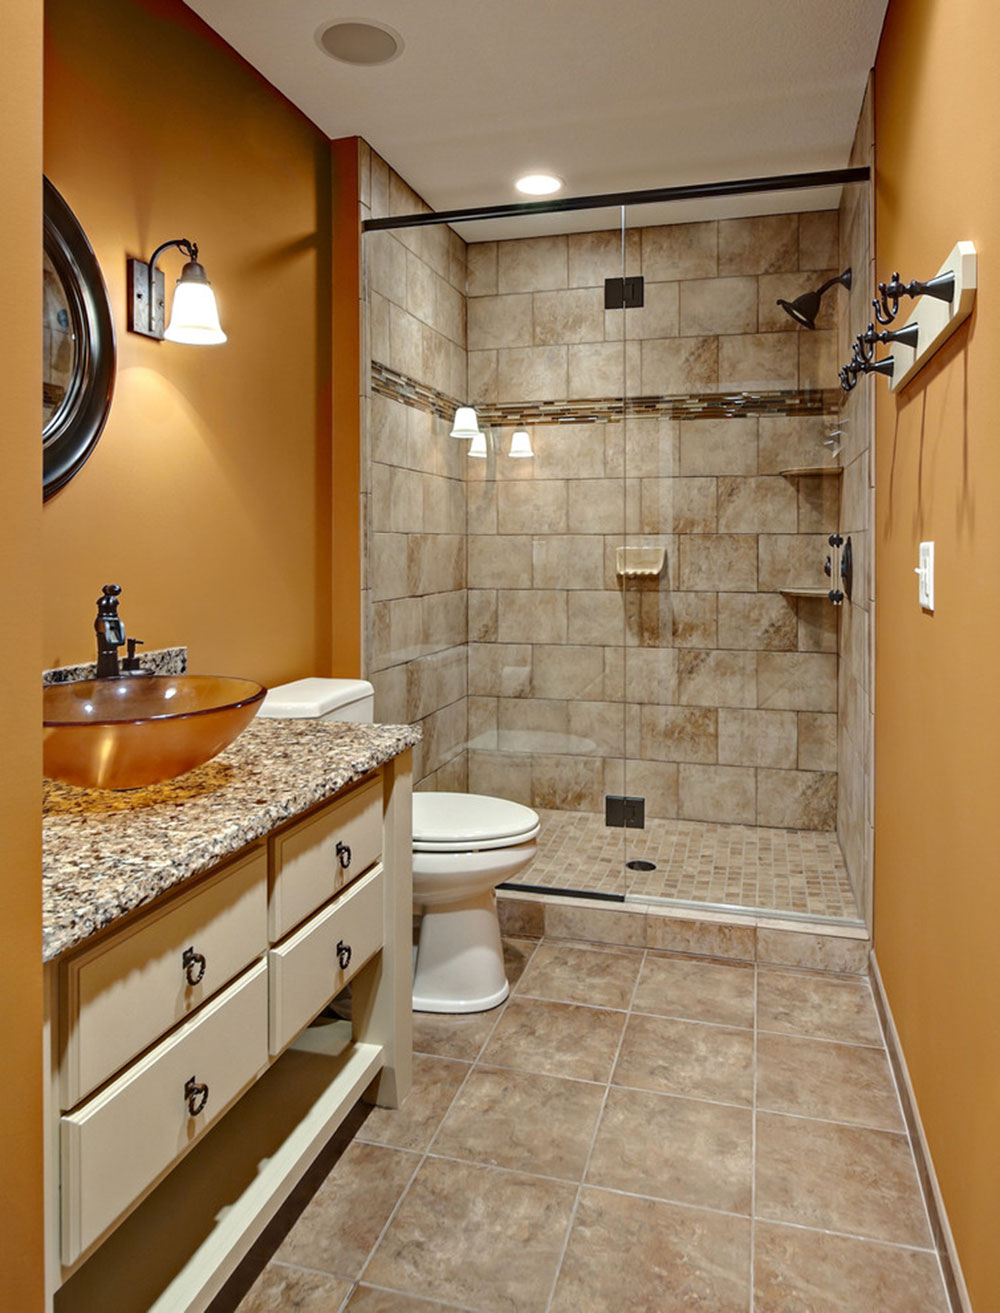 How Much Does It Cost To Add A Bathroom In The Basement Answered - Can You Put A Bathroom In The Basement